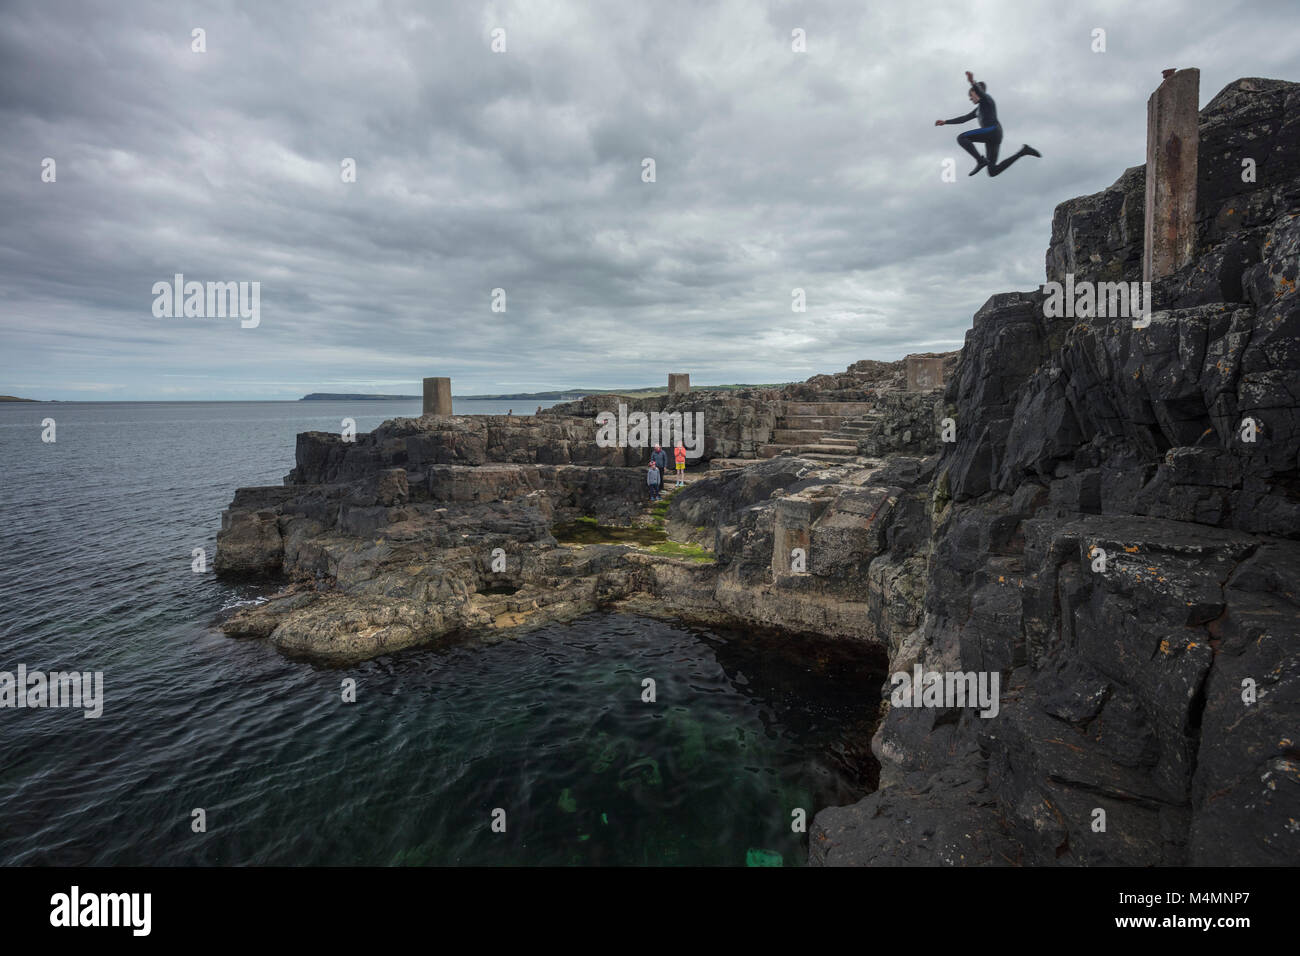 Cliff jumping into the Blue Pool, Portrush, County Antrim, Northern Ireland. Stock Photo